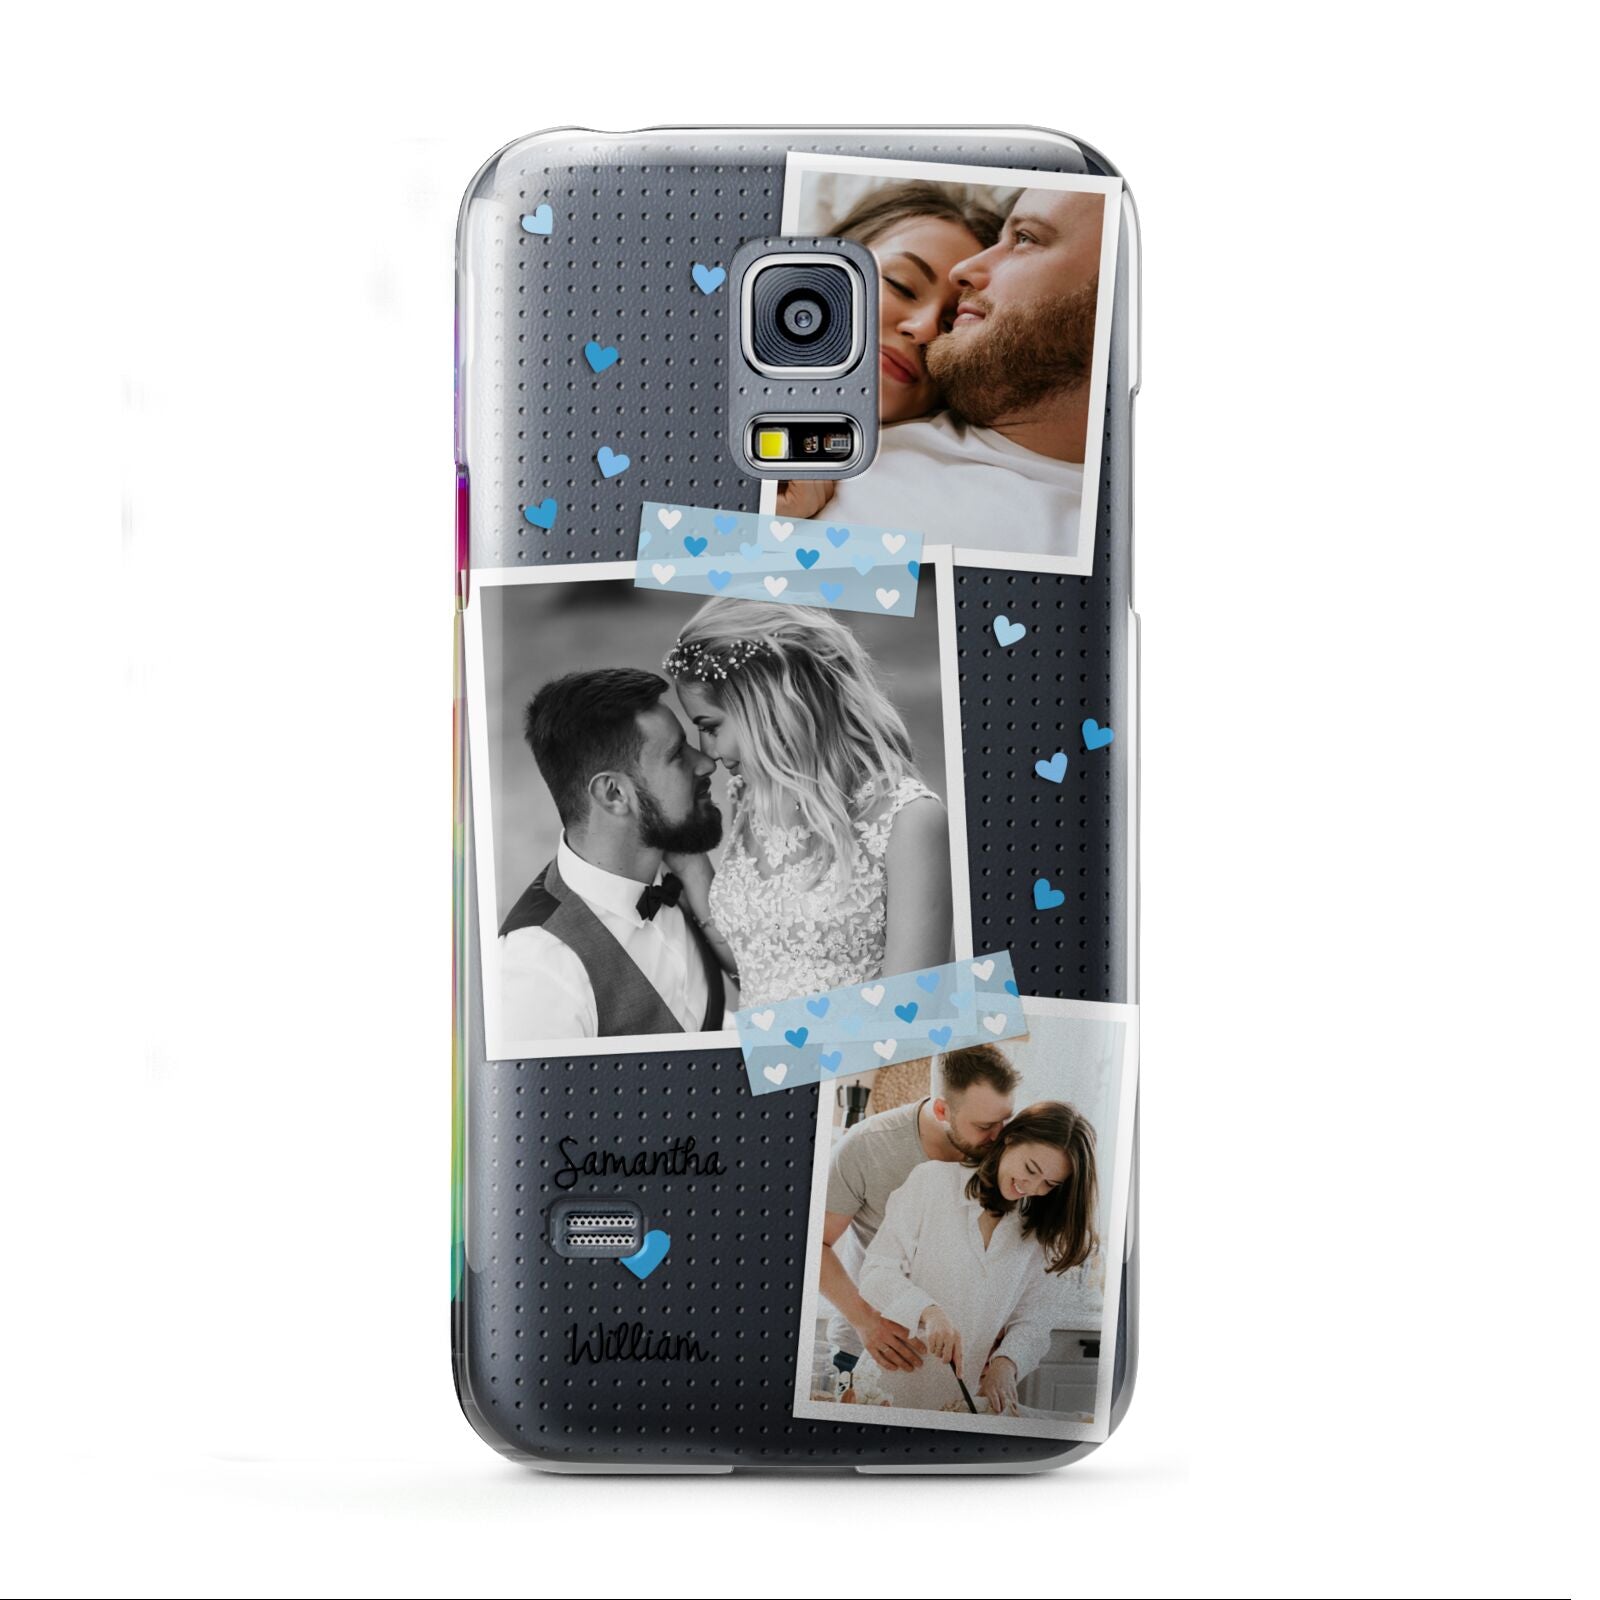 Wedding Snaps Collage with Blue Hearts and Name Samsung Galaxy S5 Mini Case